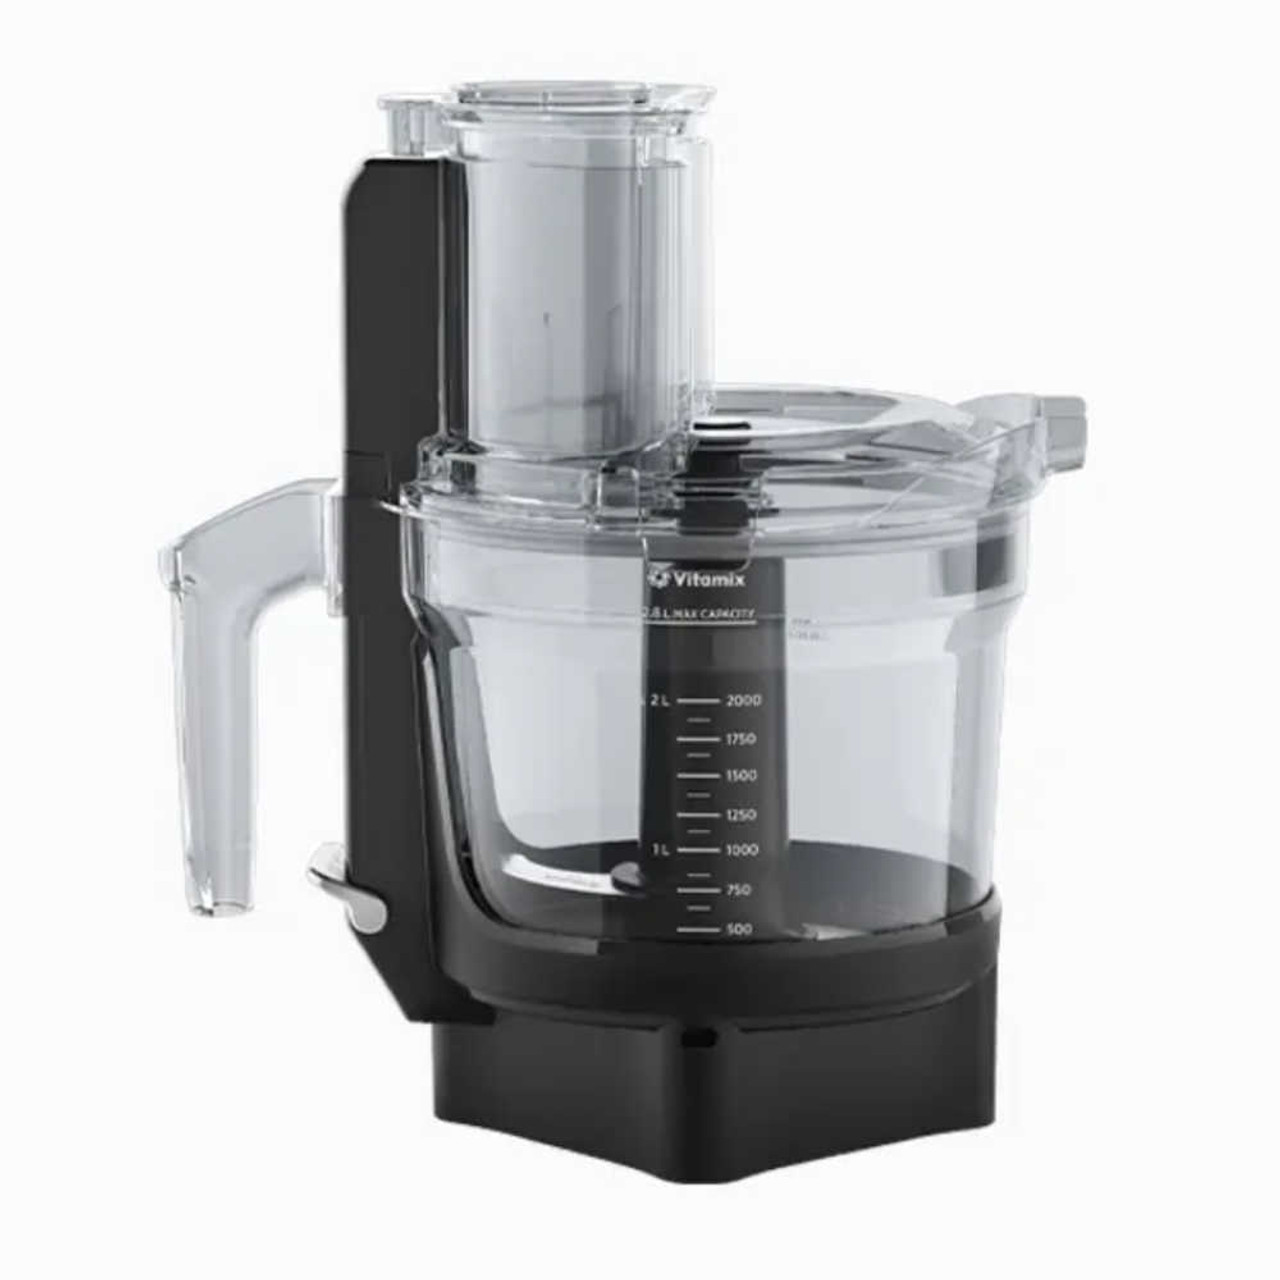 GE 12-Cup Food Processor with Accessories